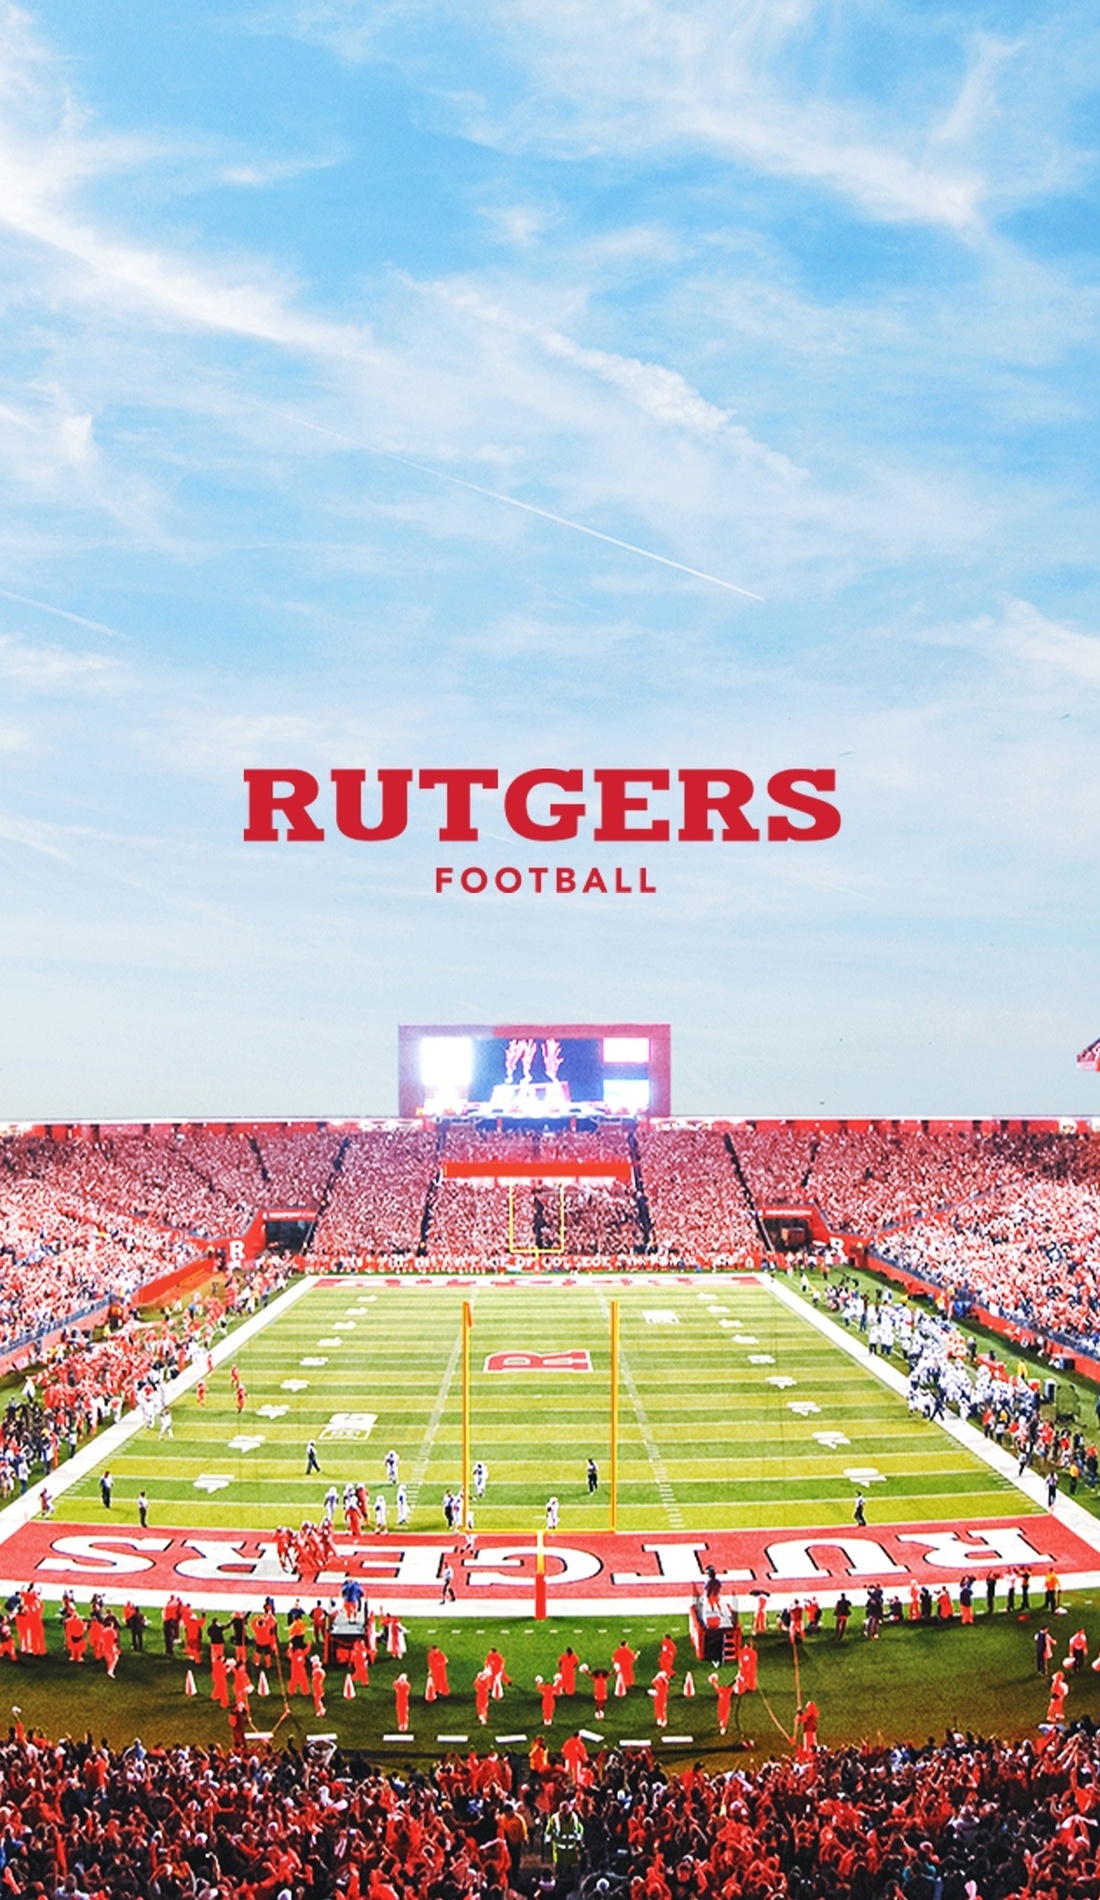 A Rutgers Scarlet Knights Football live event